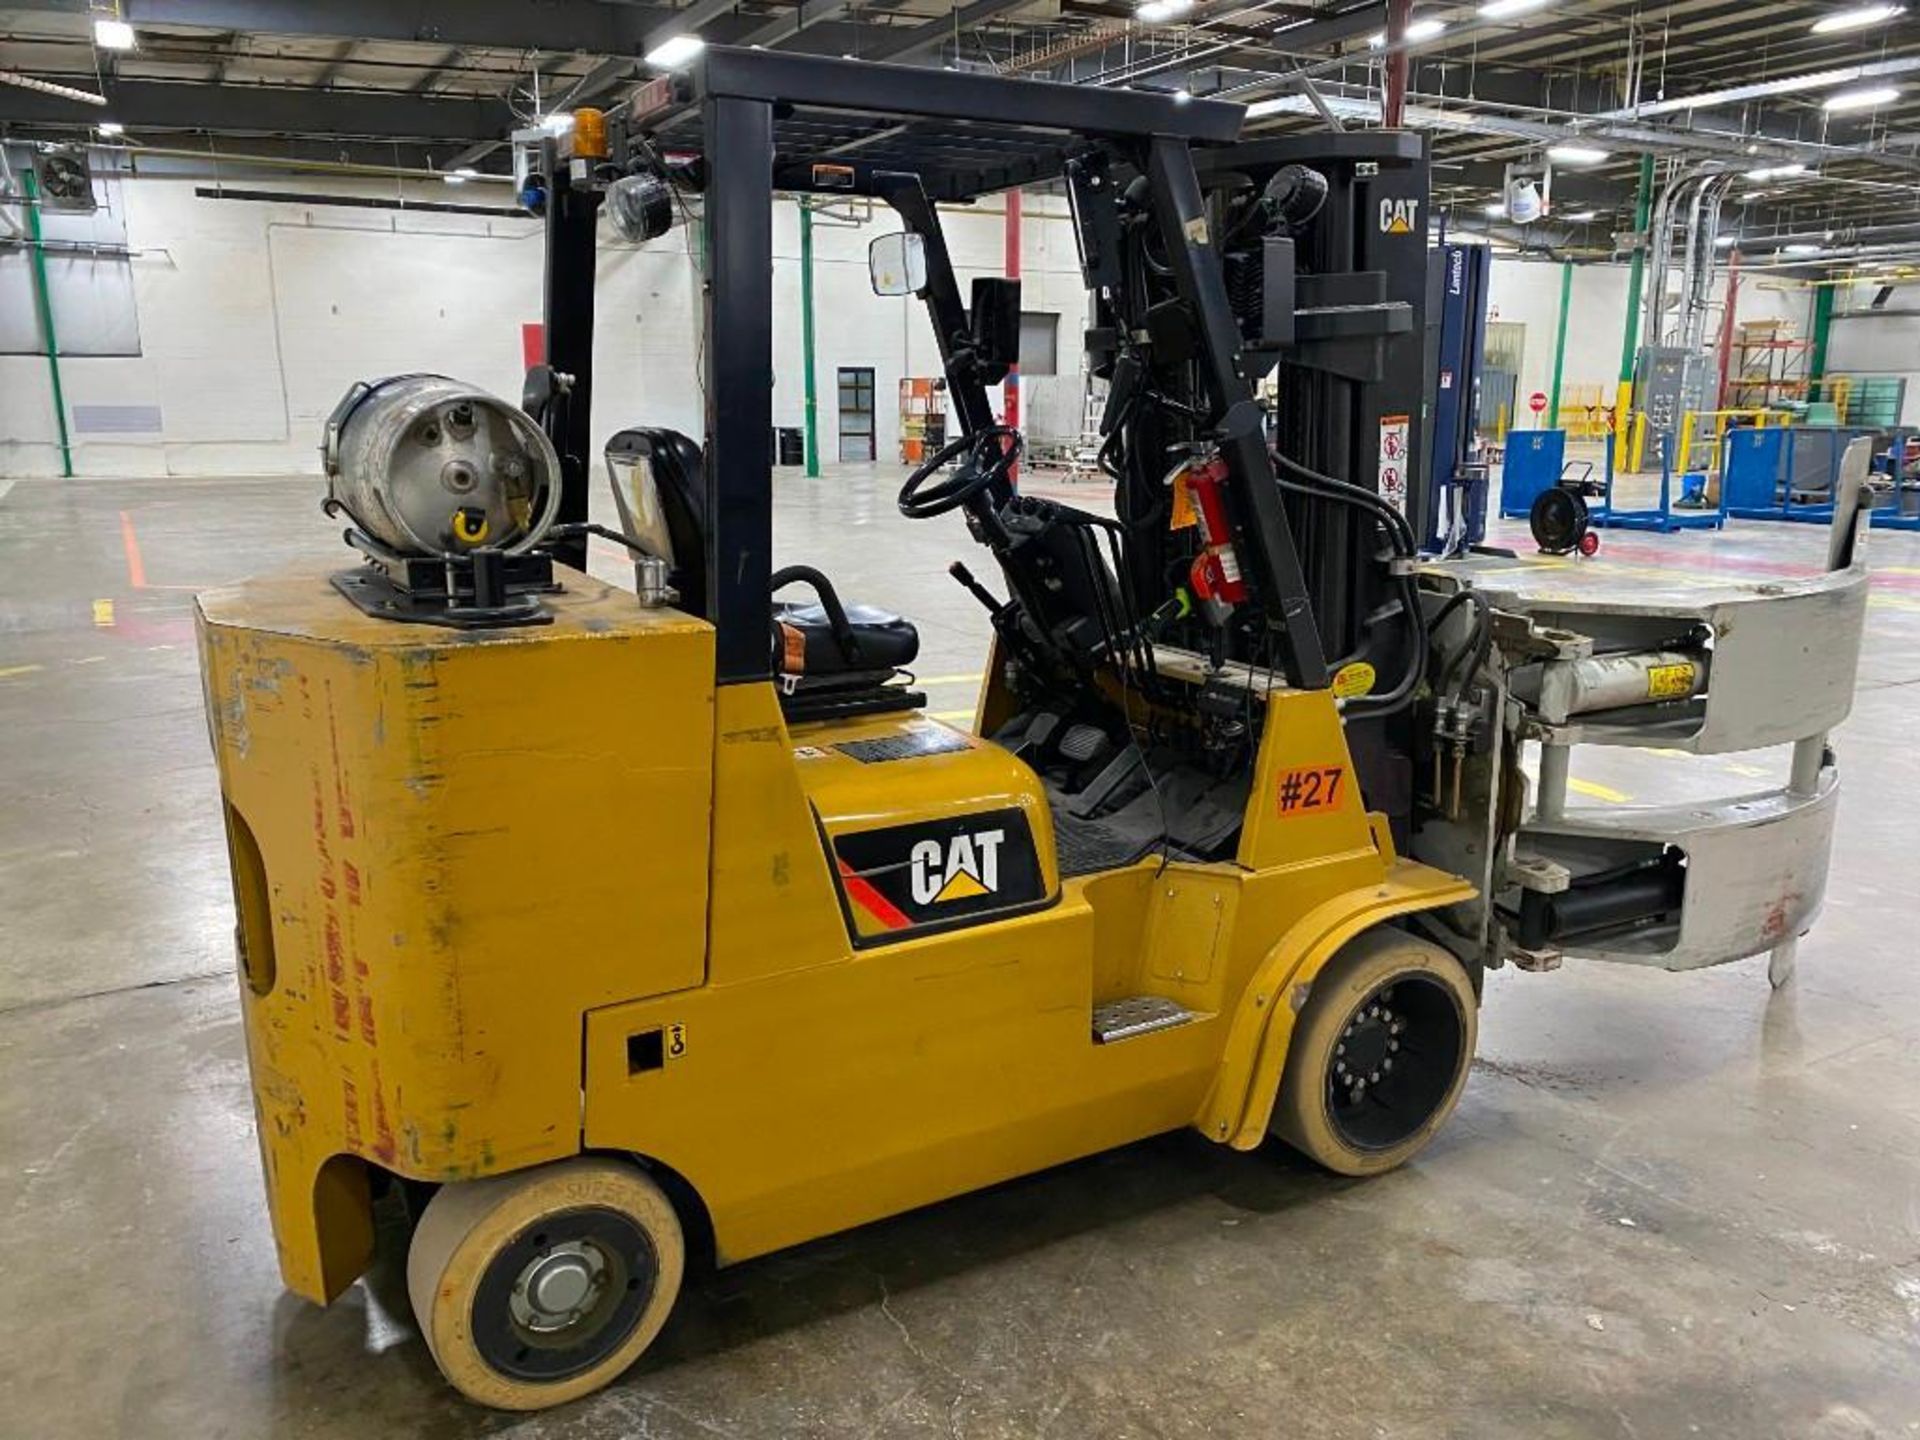 Caterpillar GC55K Forklift w/ Roll Clamp, S/N AT88A30678, 3-Stage Mast, Solid Non-Marking Tires, LP